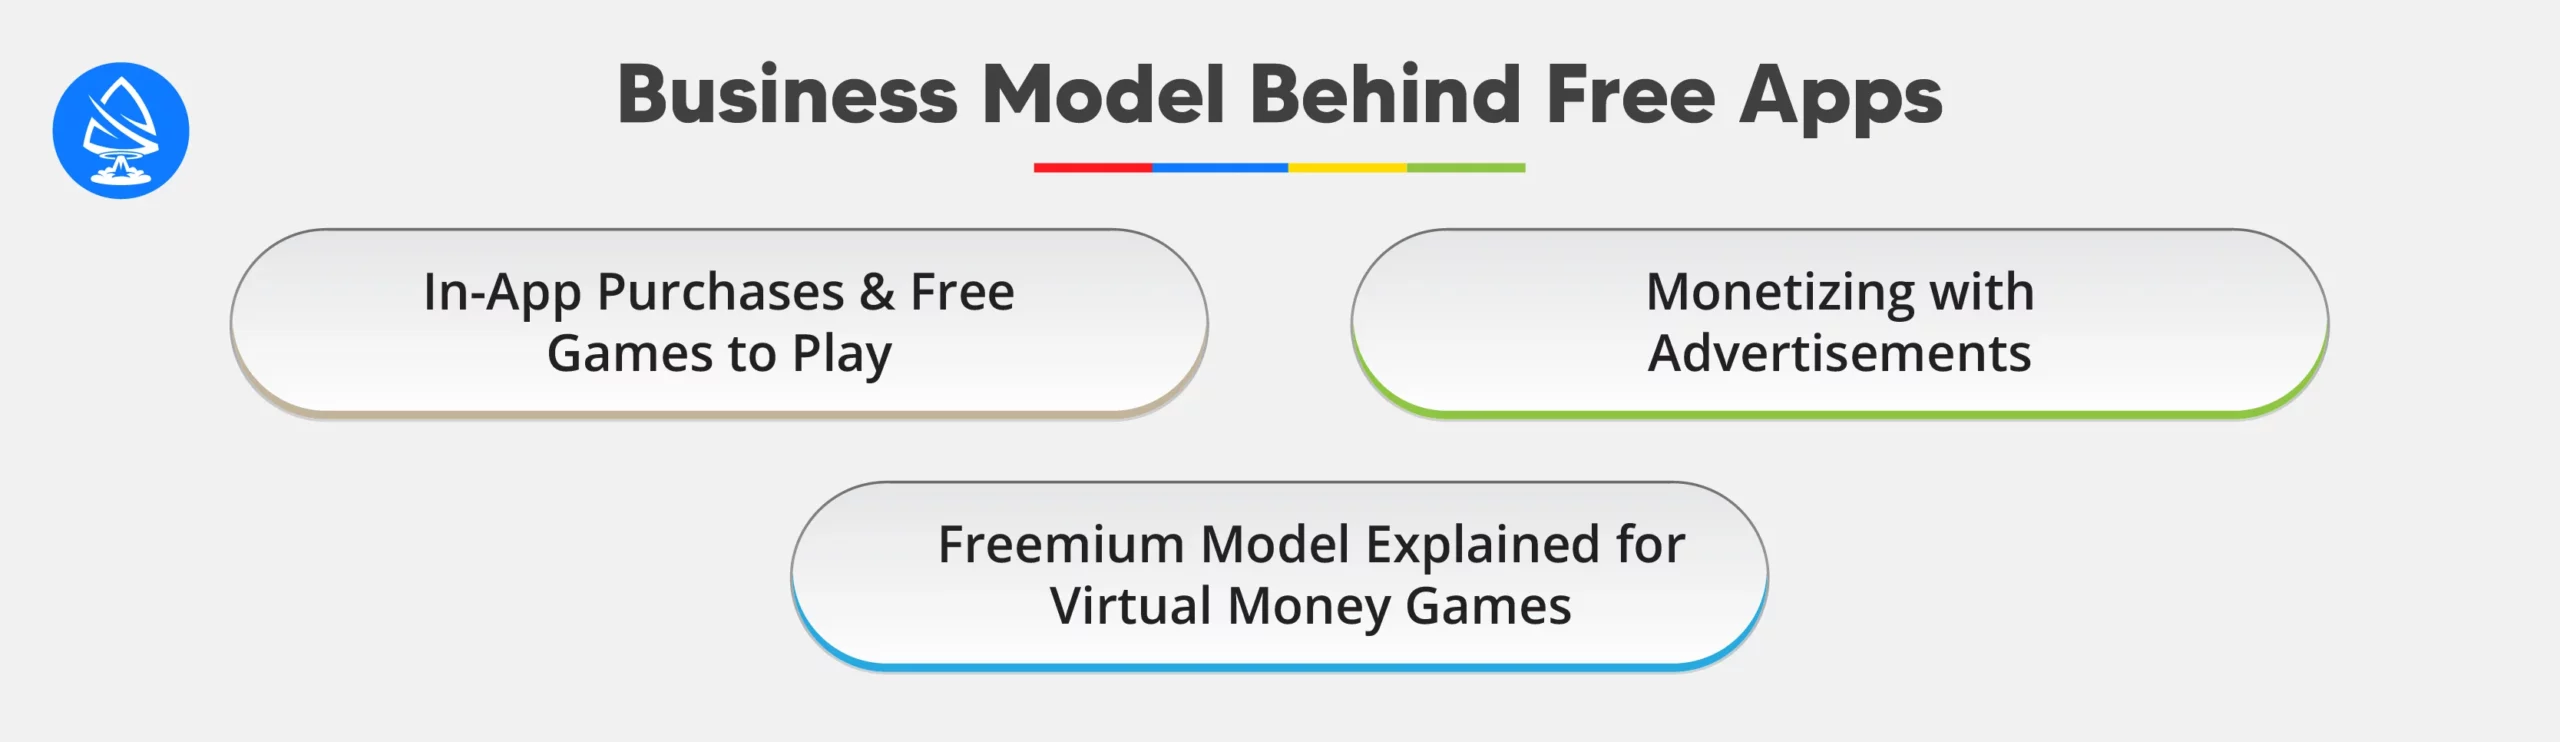 Business Model Behind Free Apps